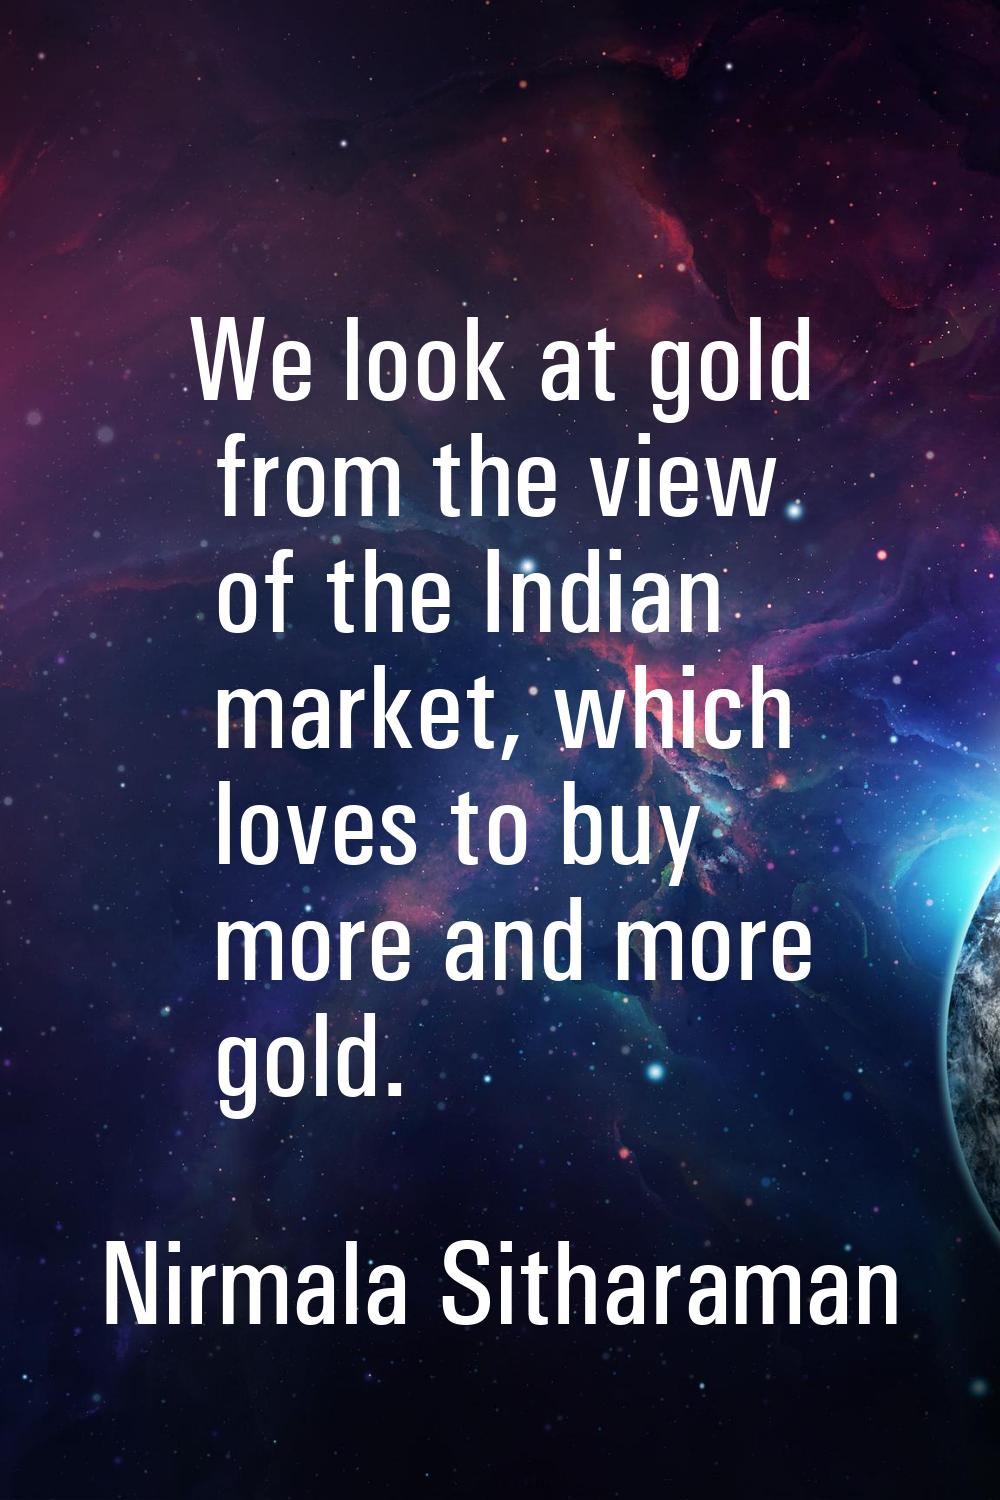 We look at gold from the view of the Indian market, which loves to buy more and more gold.